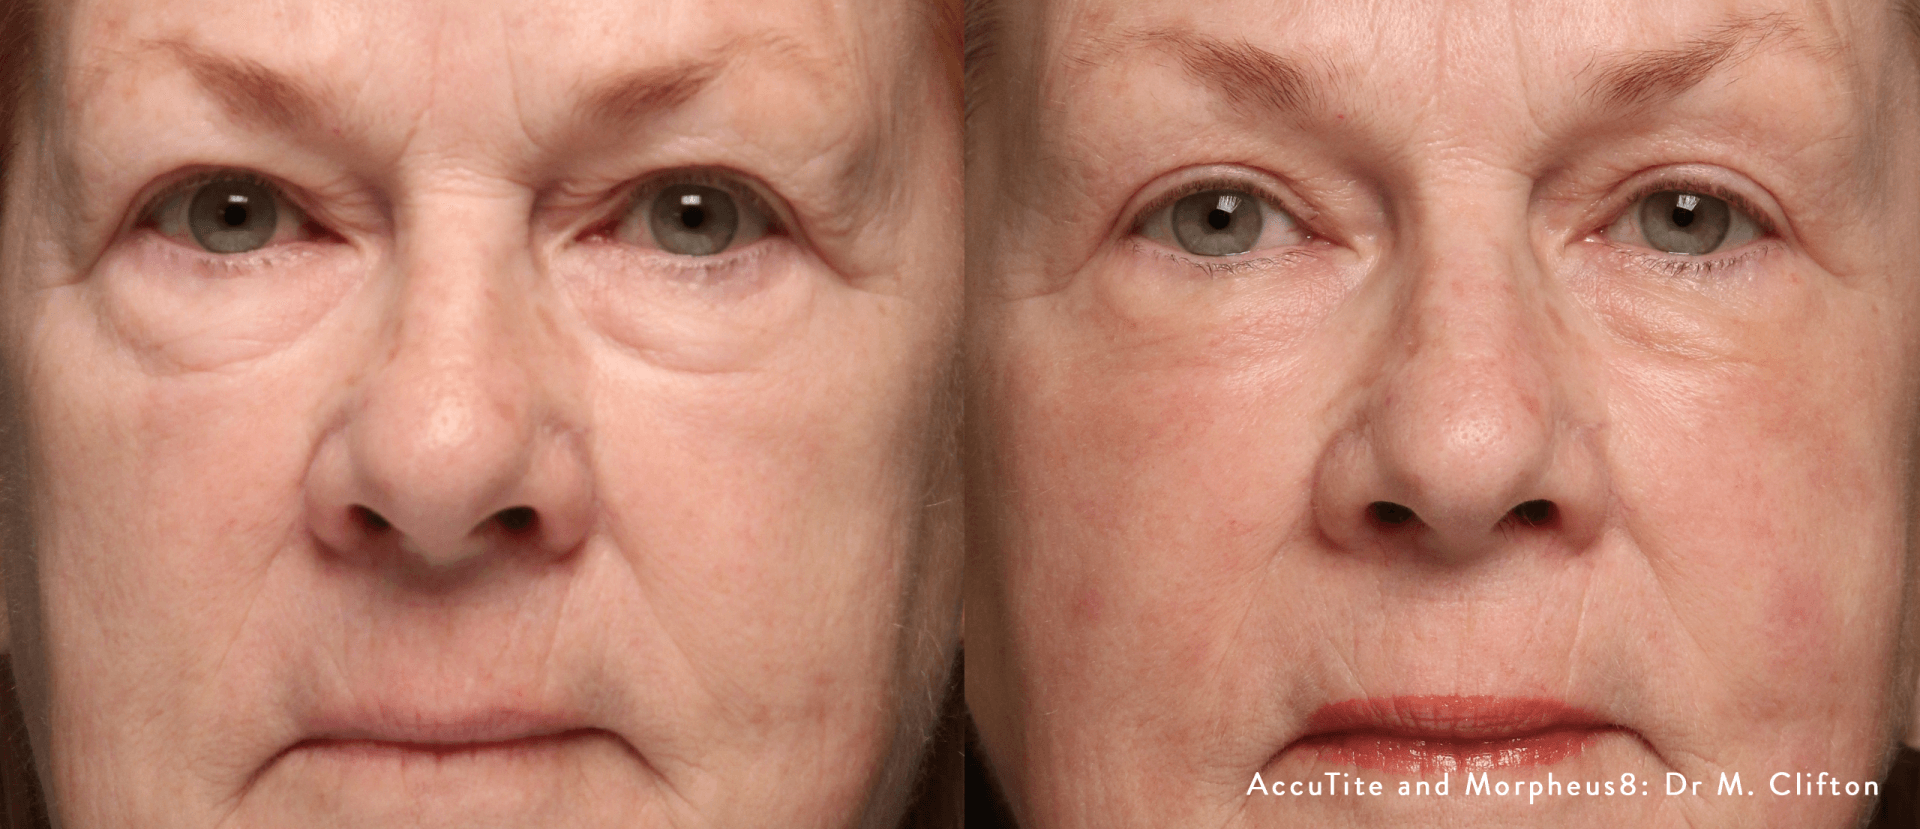 closeup of patient's face before and after morpheus8 treatment